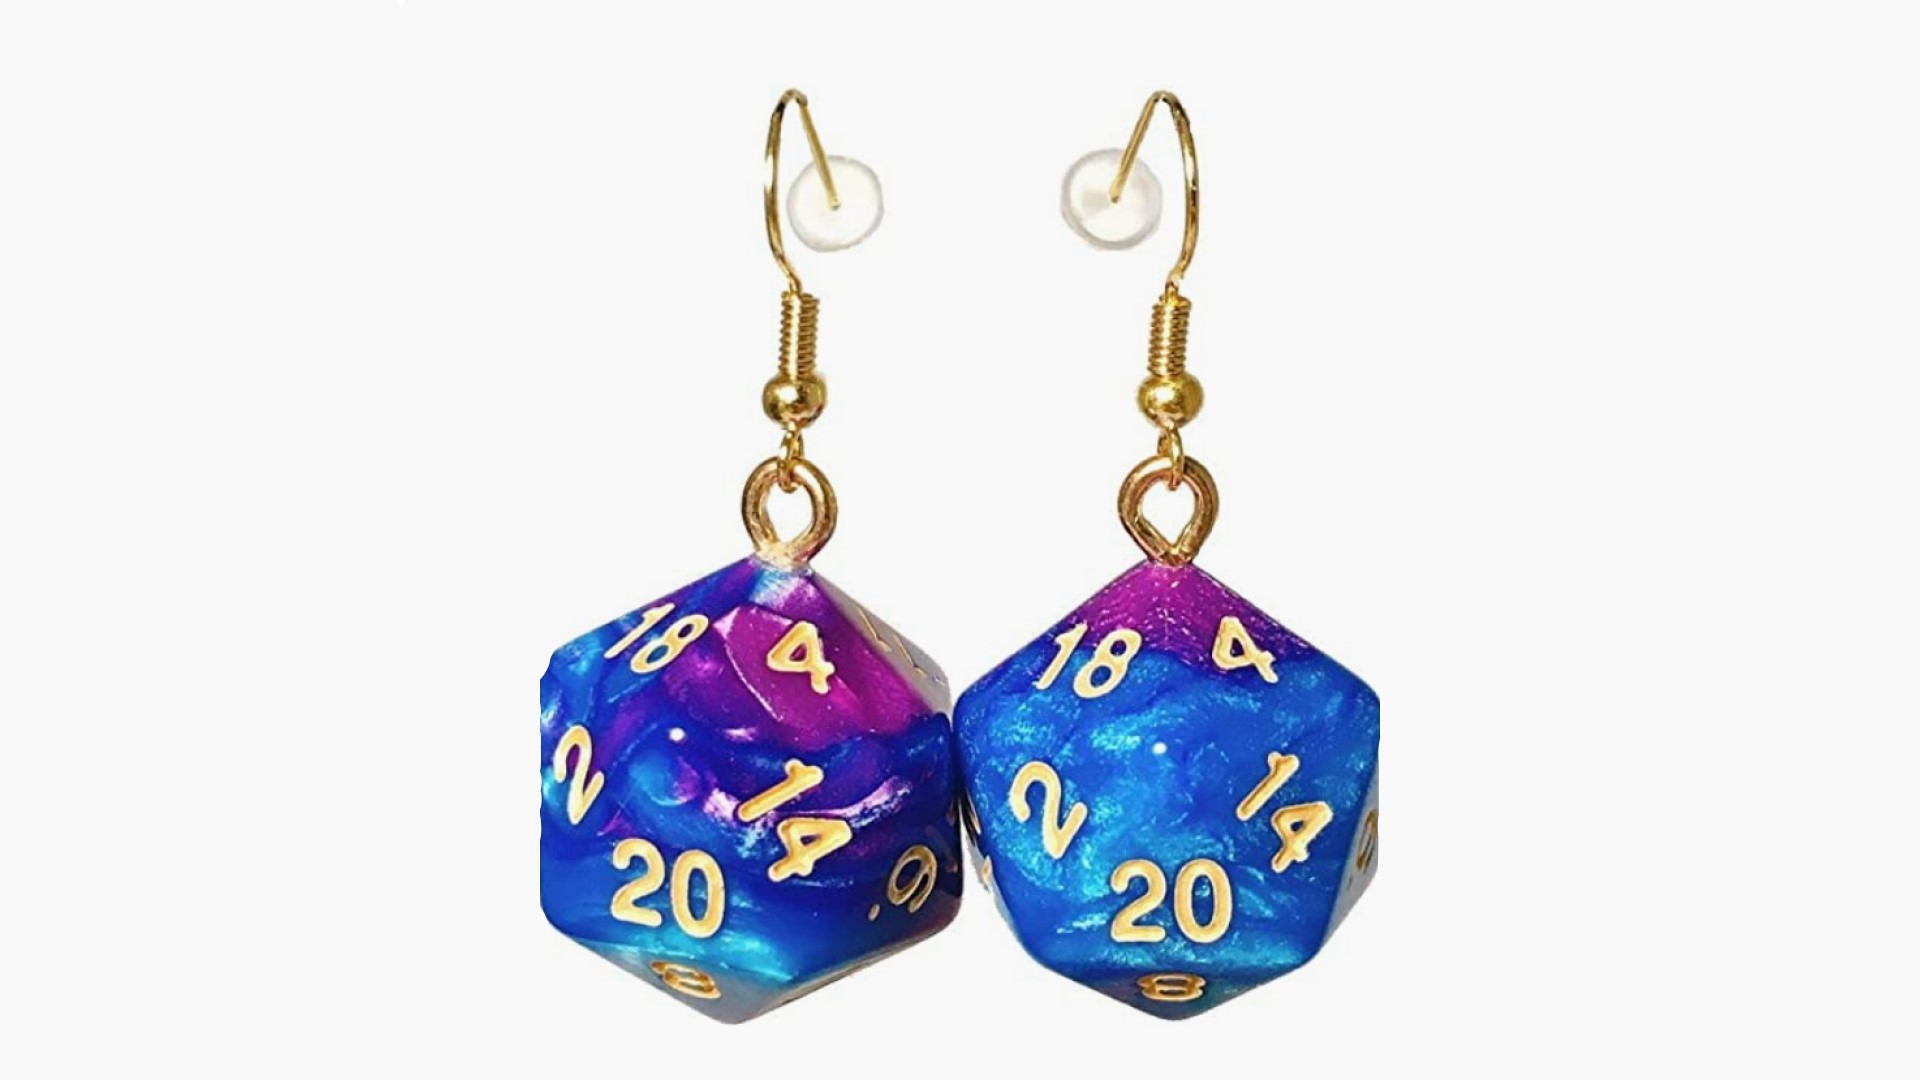 DnD gifts - dice earrings